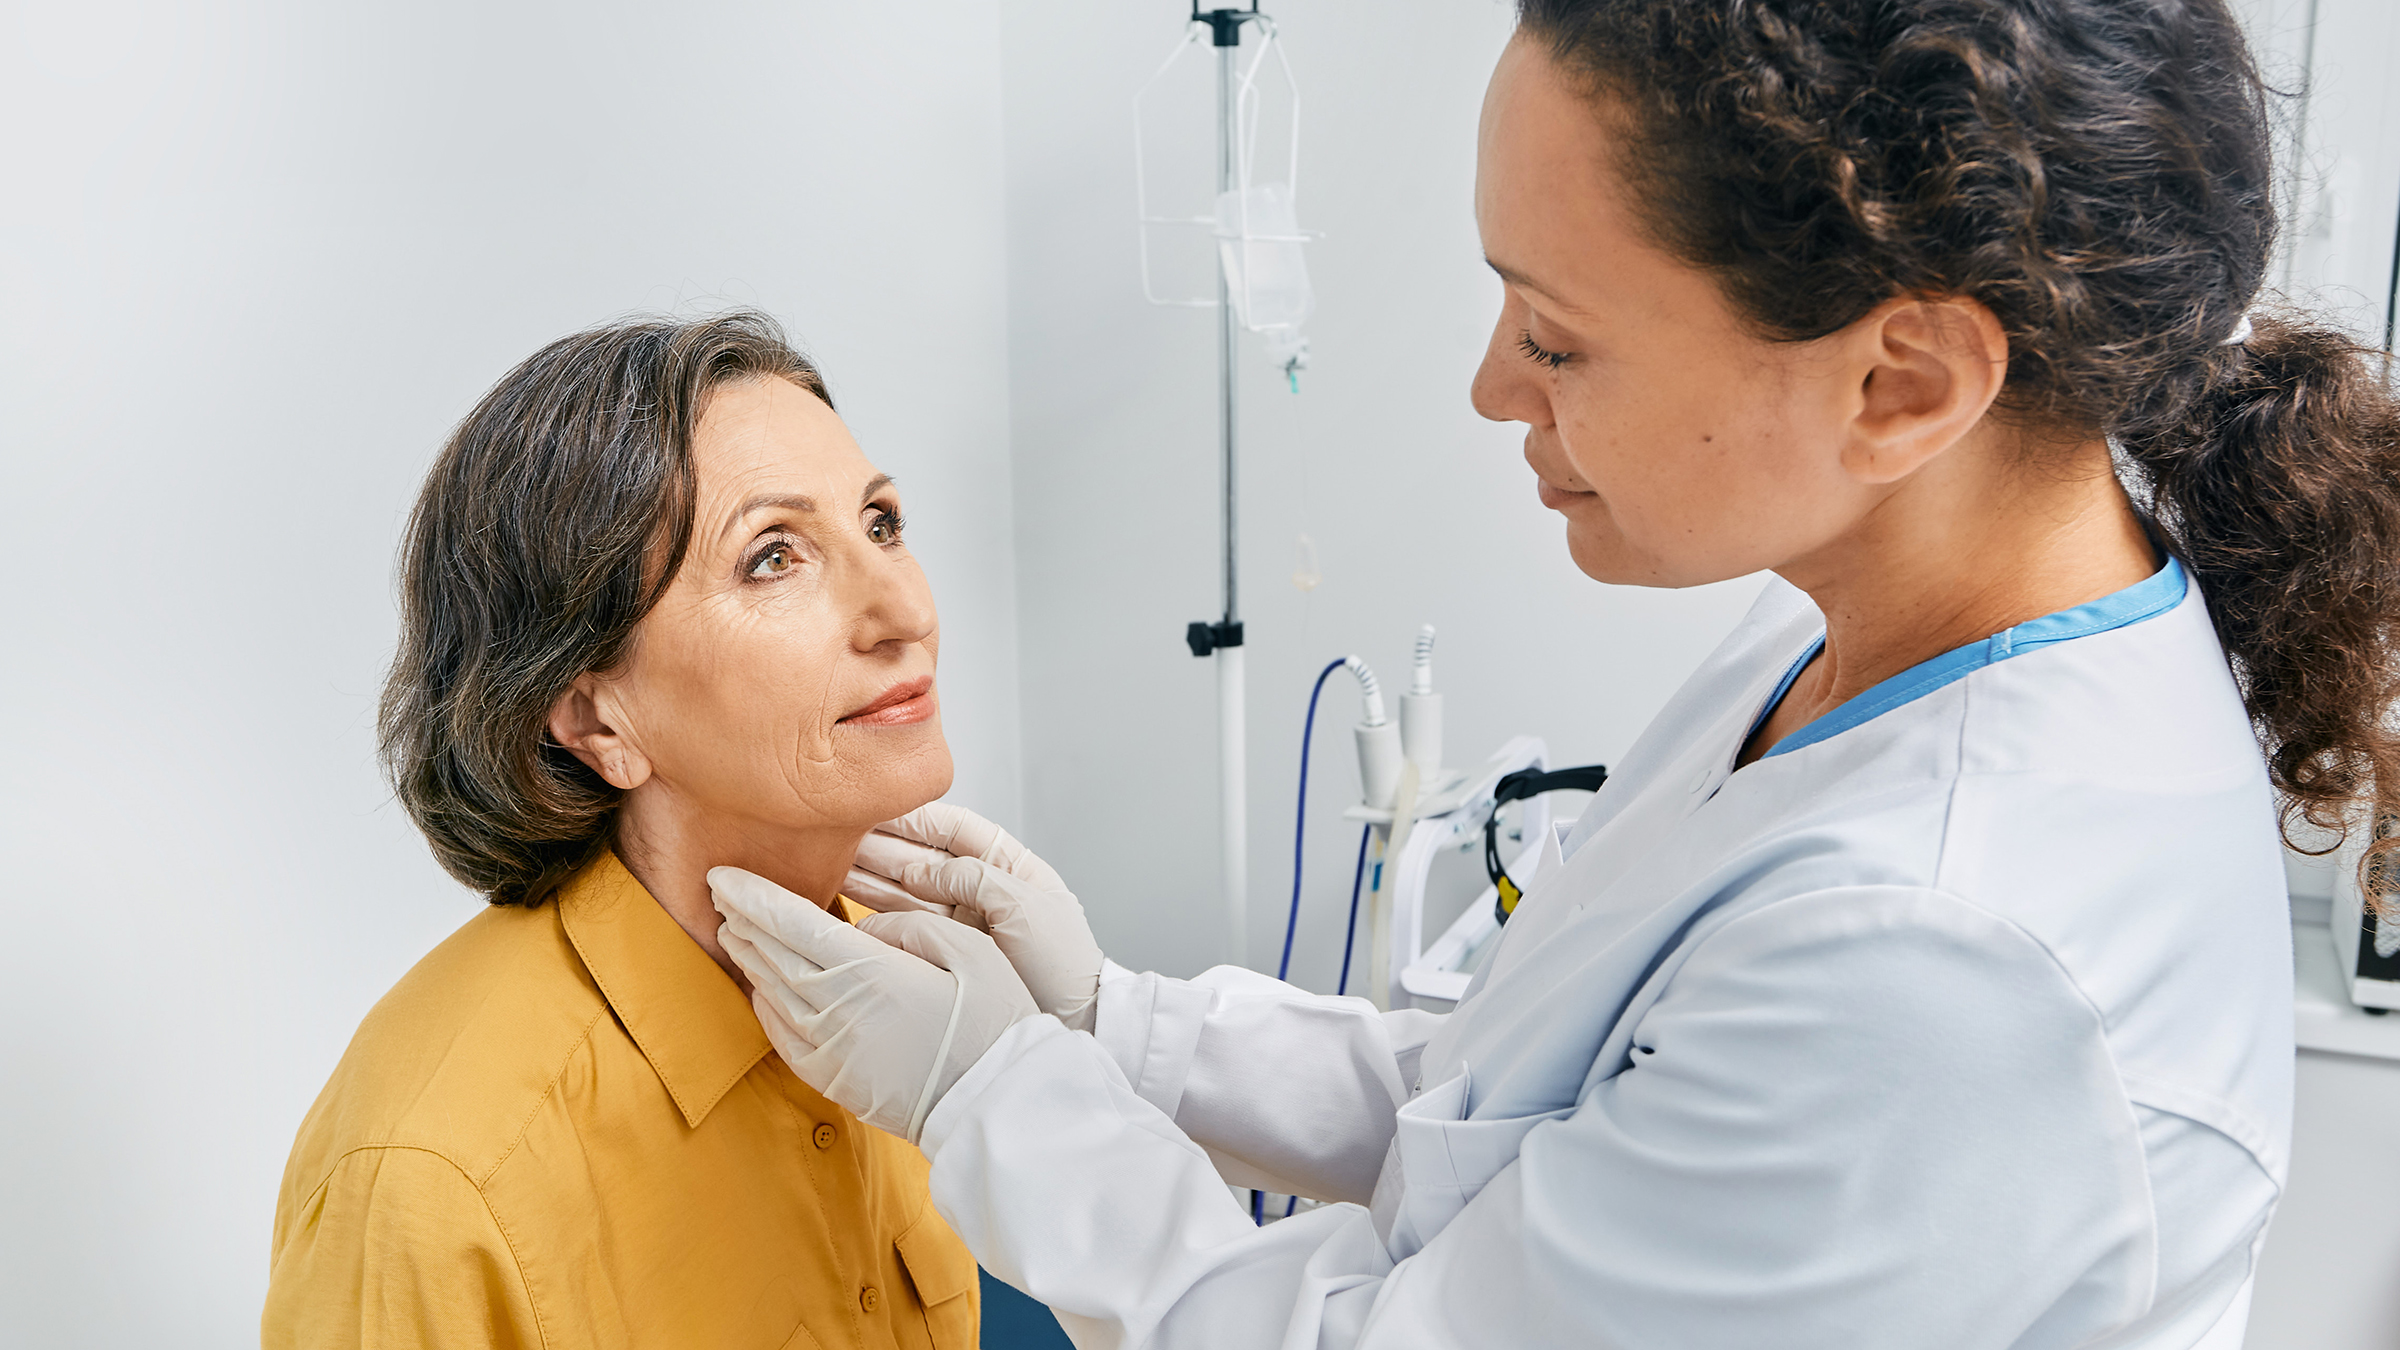 Thyroid Radiofrequency Ablation in Newport: What are the Benefits Over Thyroid Surgery